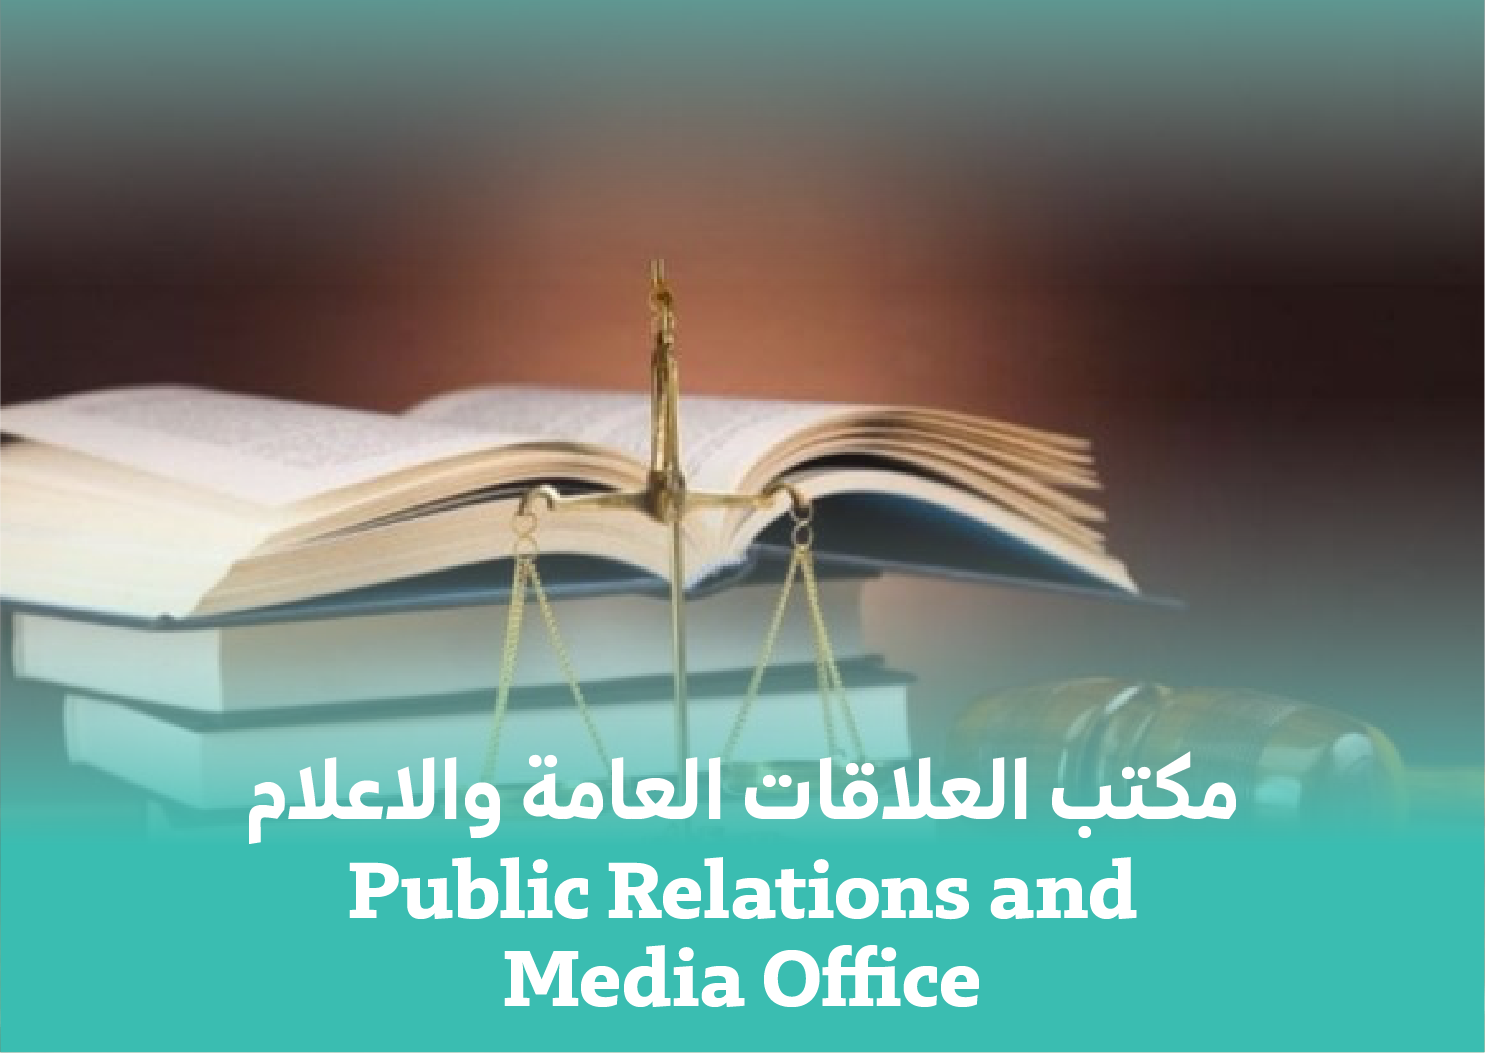  Public Relations and Media Office